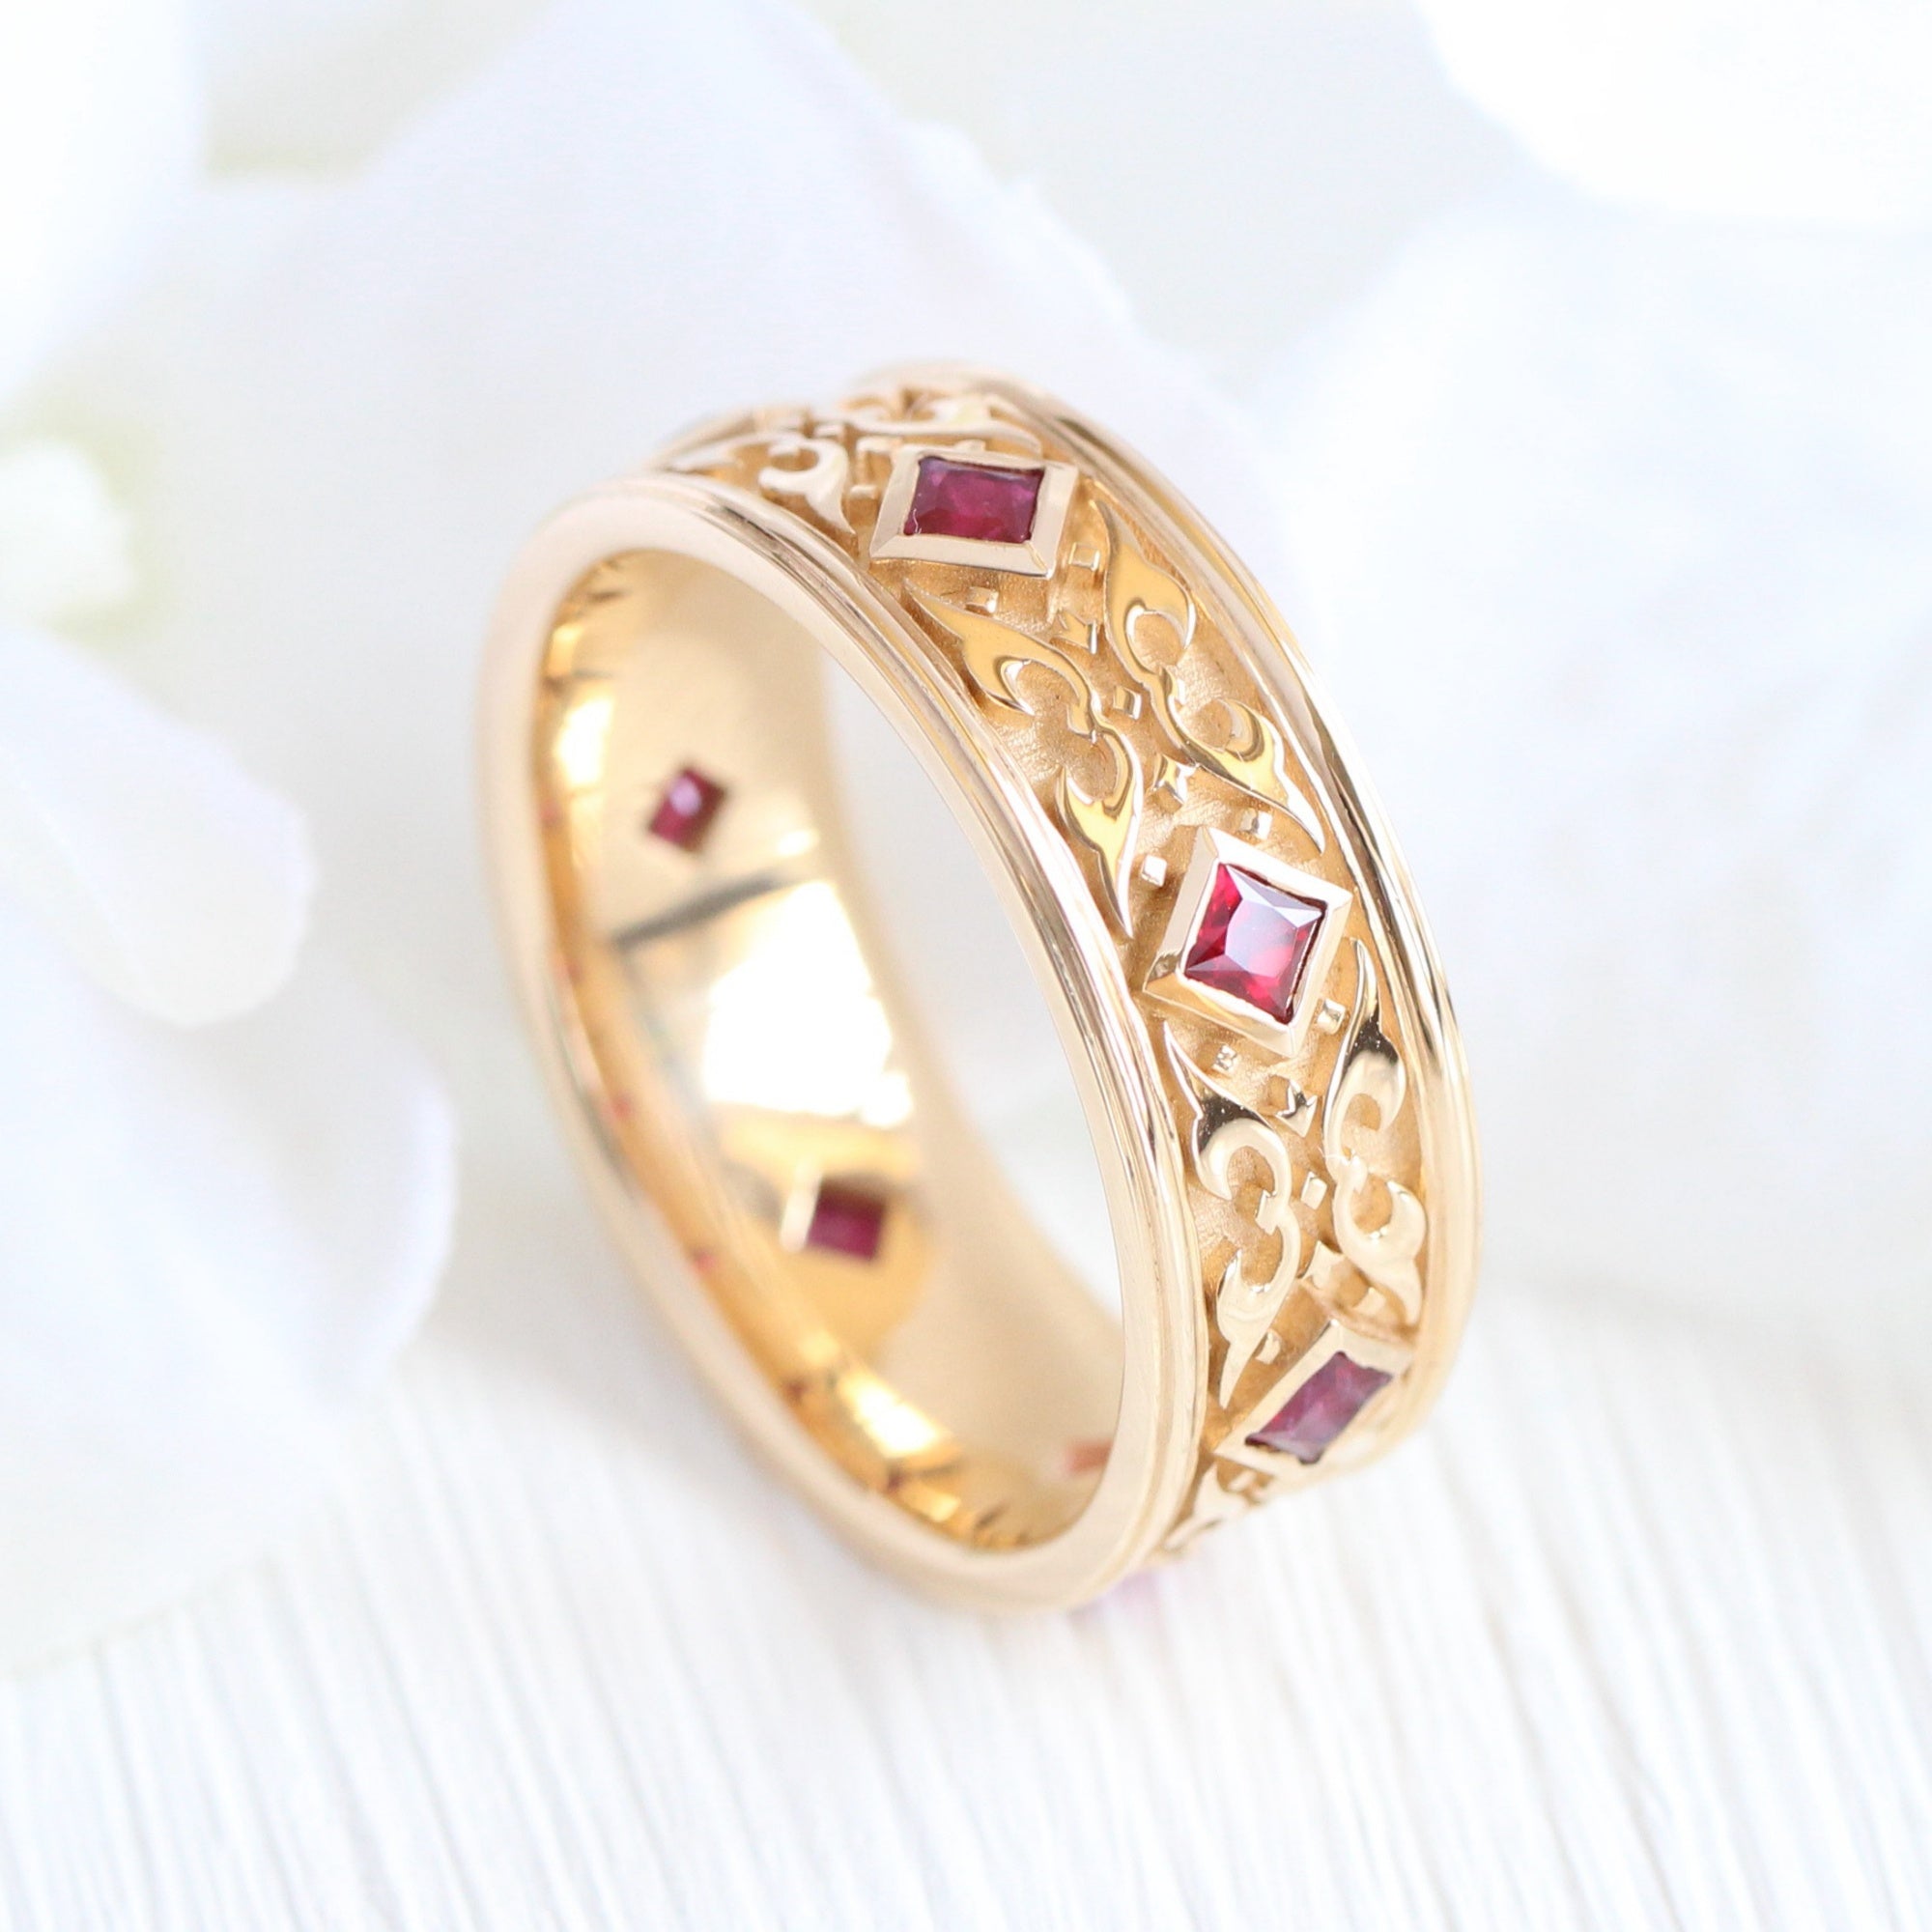 celtic mens wedding bands yellow gold princess cut ruby ring la more design jewelry 